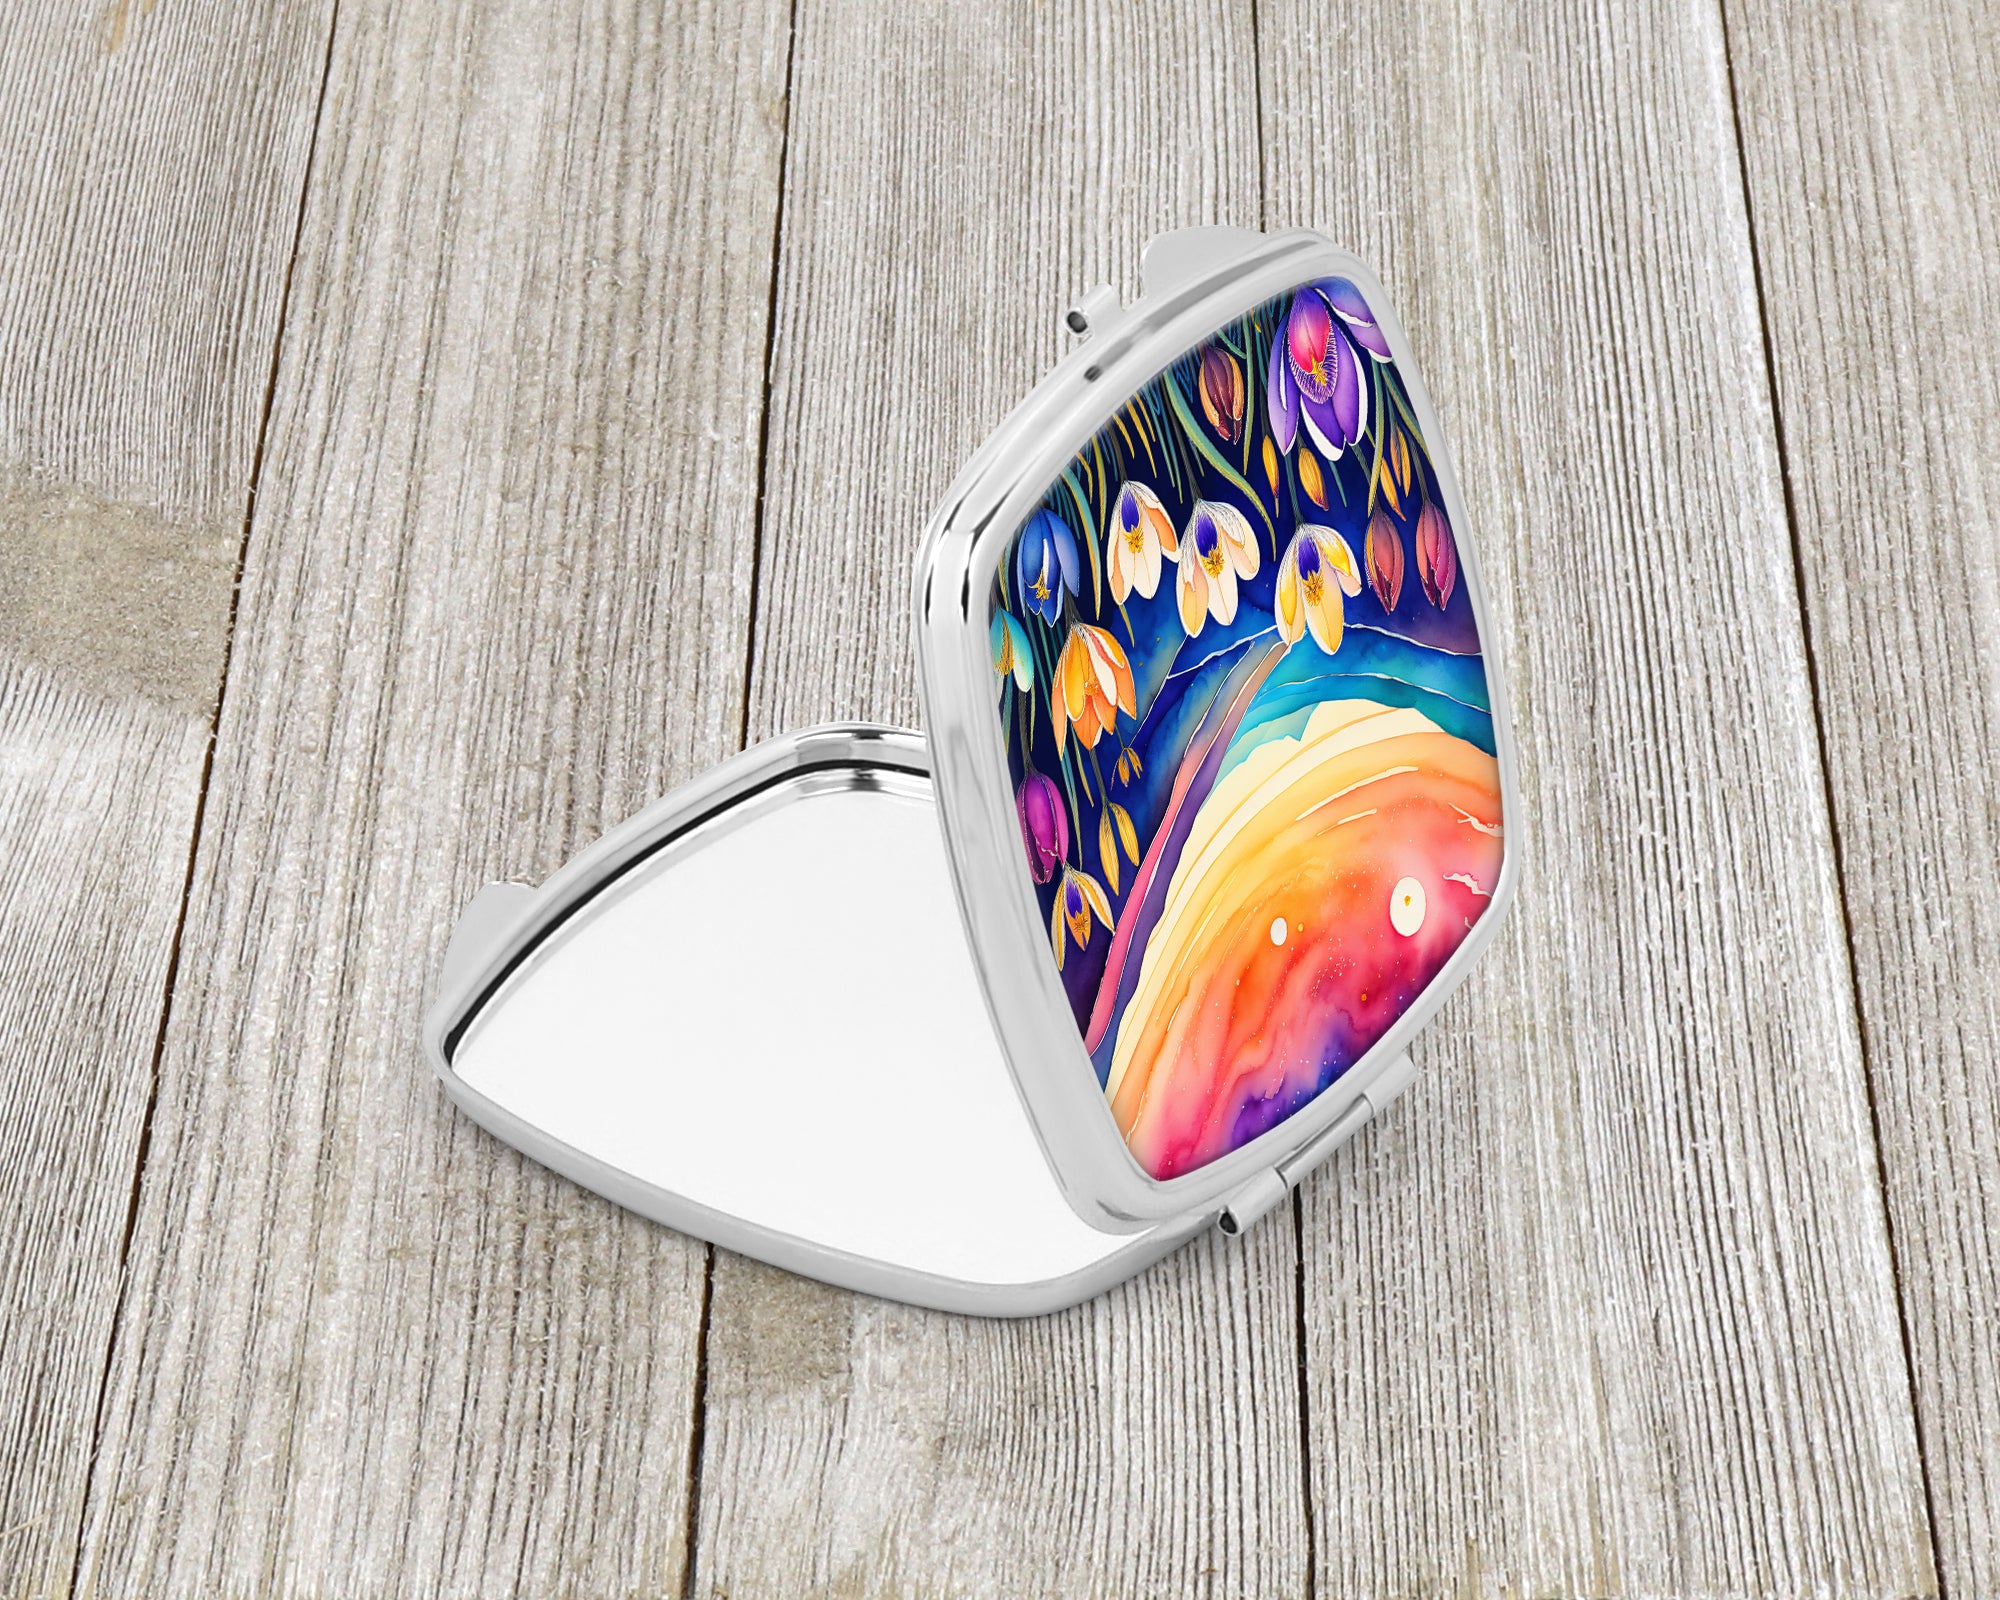 Buy this Colorful Crocus Compact Mirror